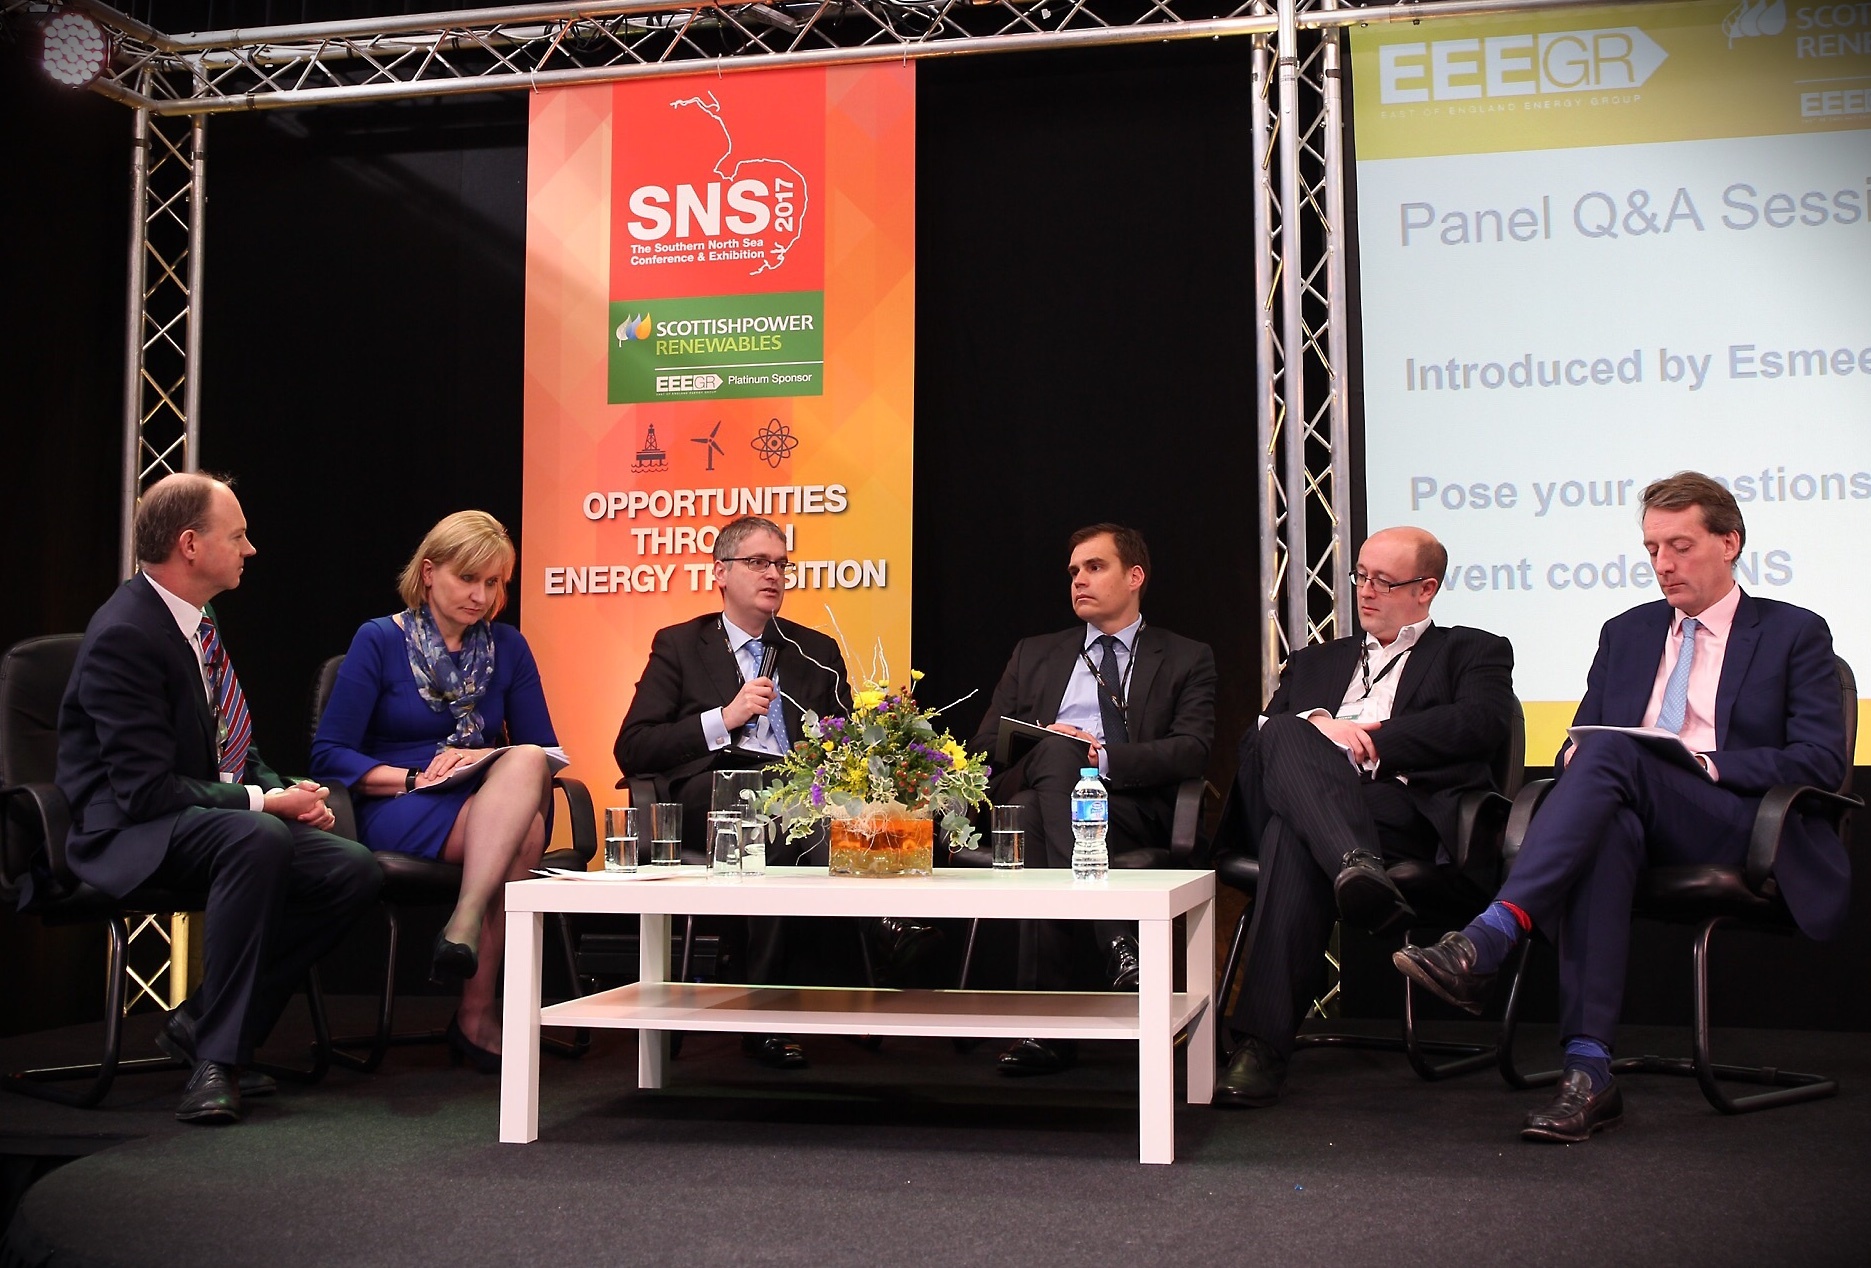 Speakers at the first panel session at SNS 2017.
Photo credit: TMS Media.